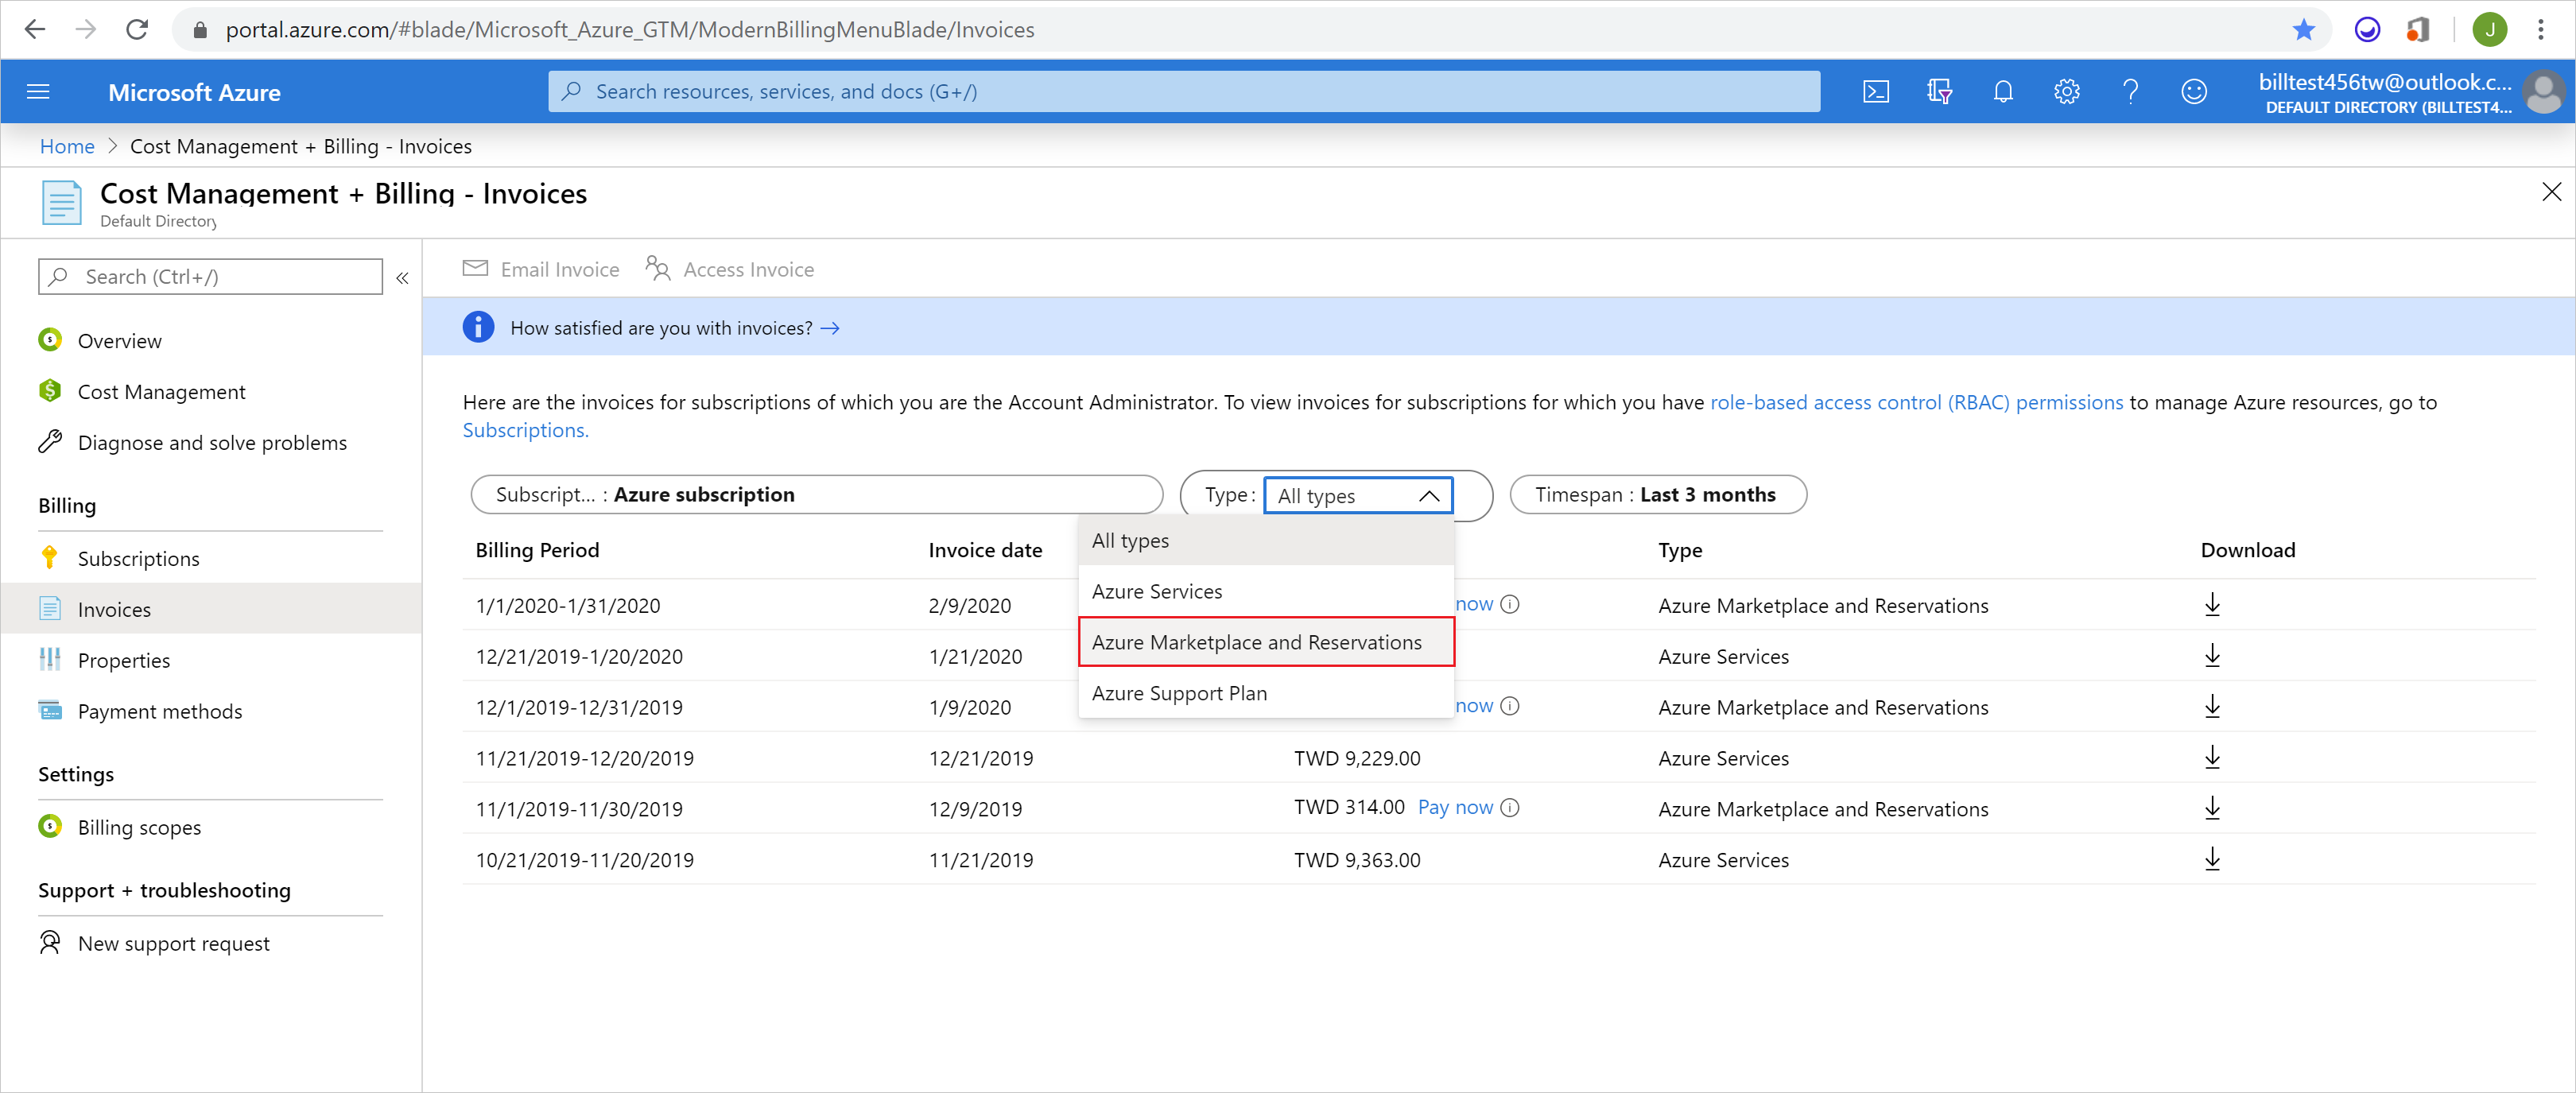 Screenshot showing the Azure Marketplace and Reservation selected in the drop-down.